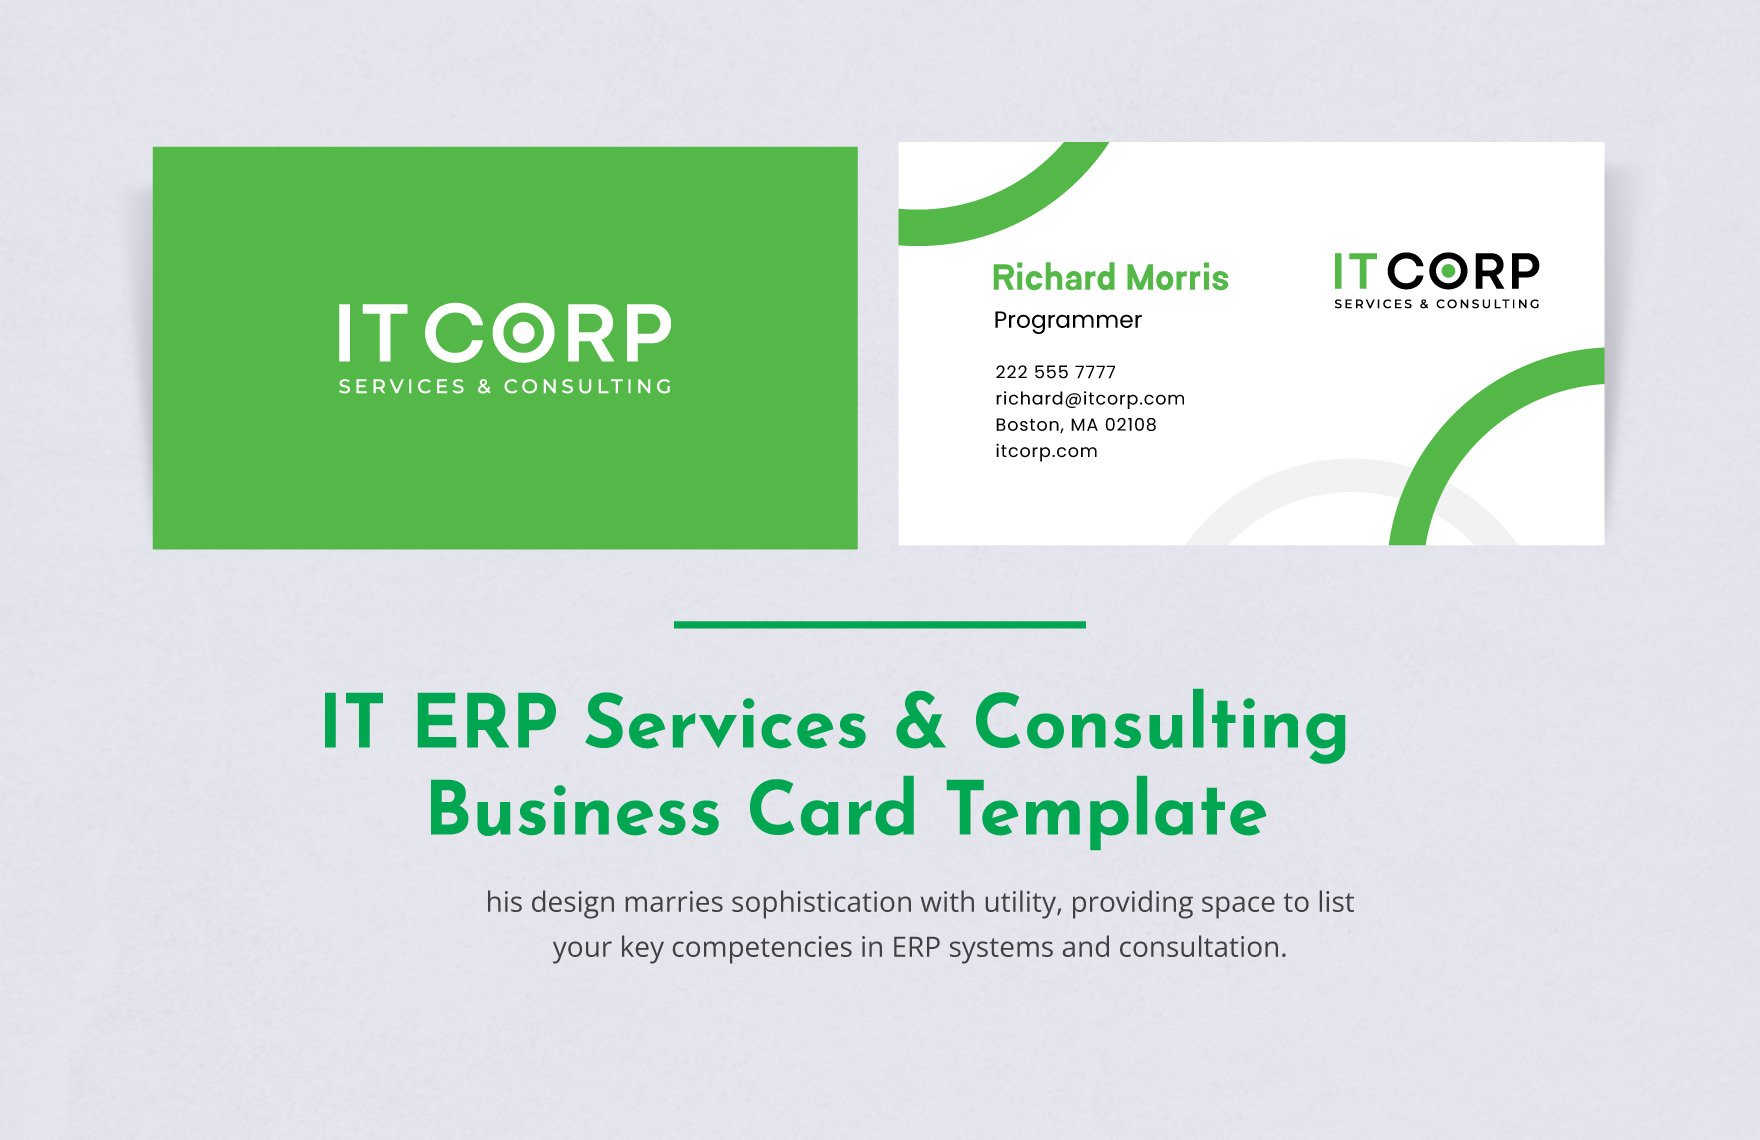 IT ERP Services & Consulting Business Card Template